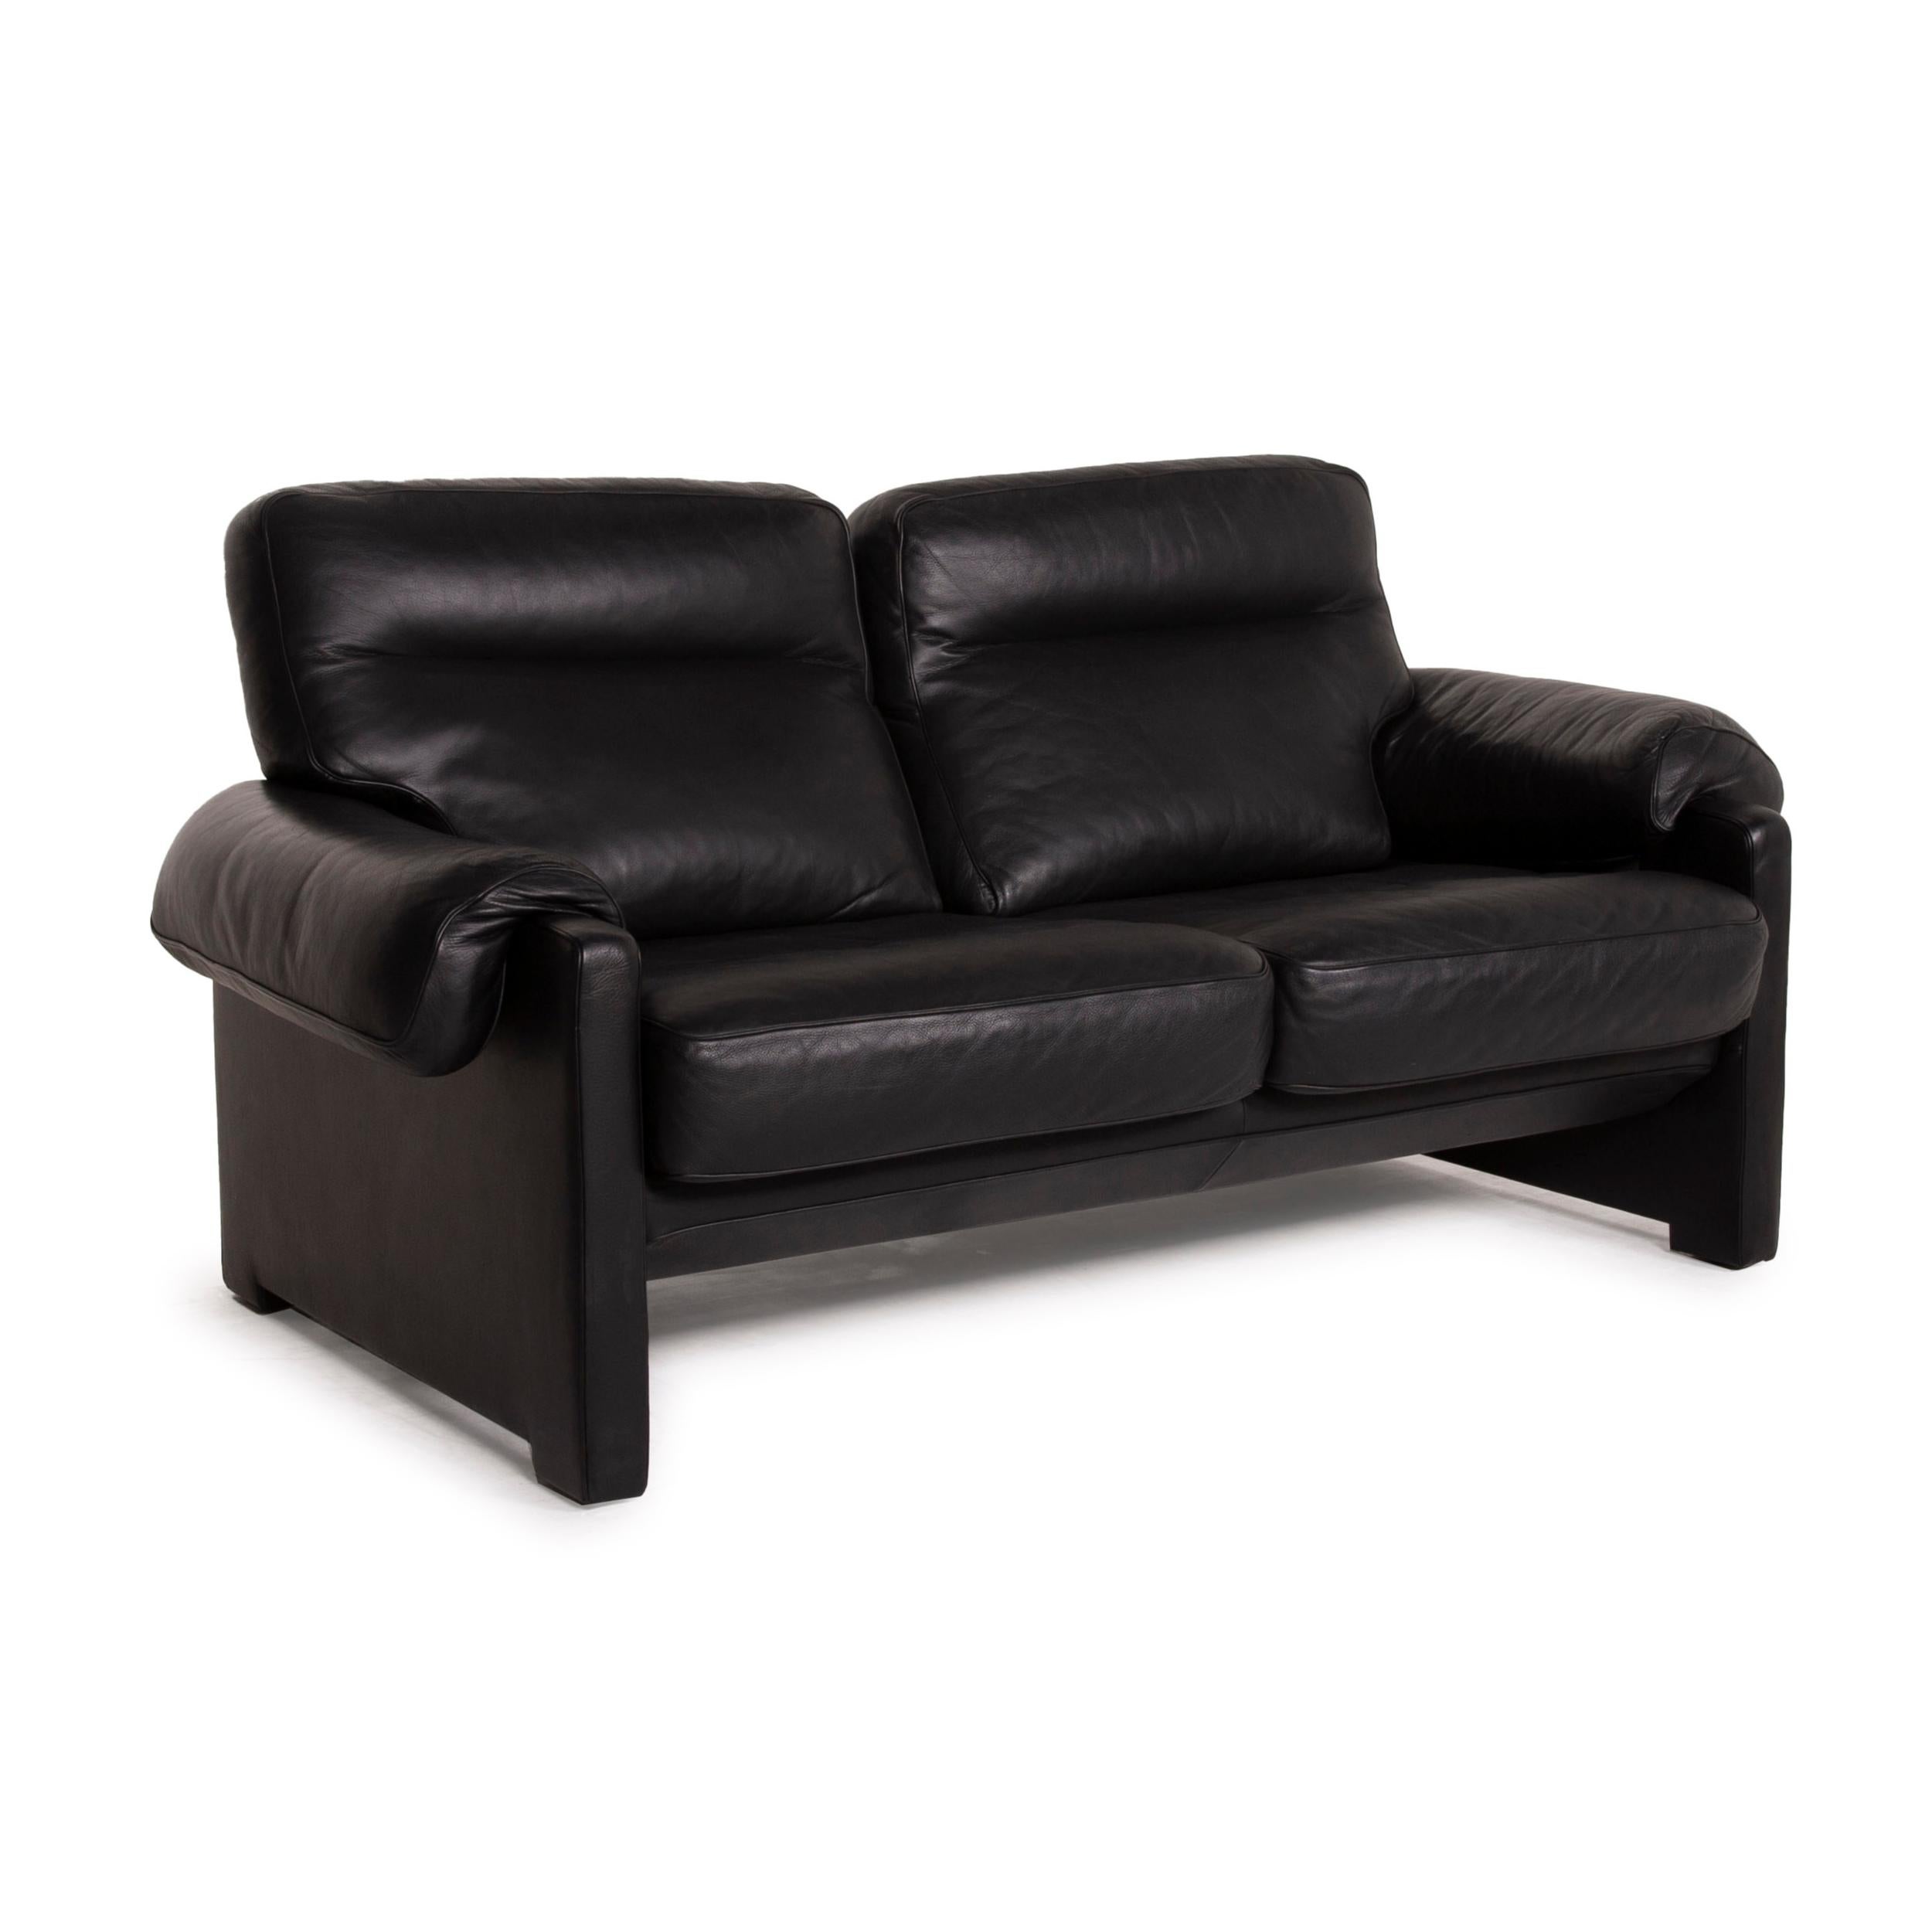 Contemporary De Sede ds 70 Leather Sofa Black Two-Seater For Sale